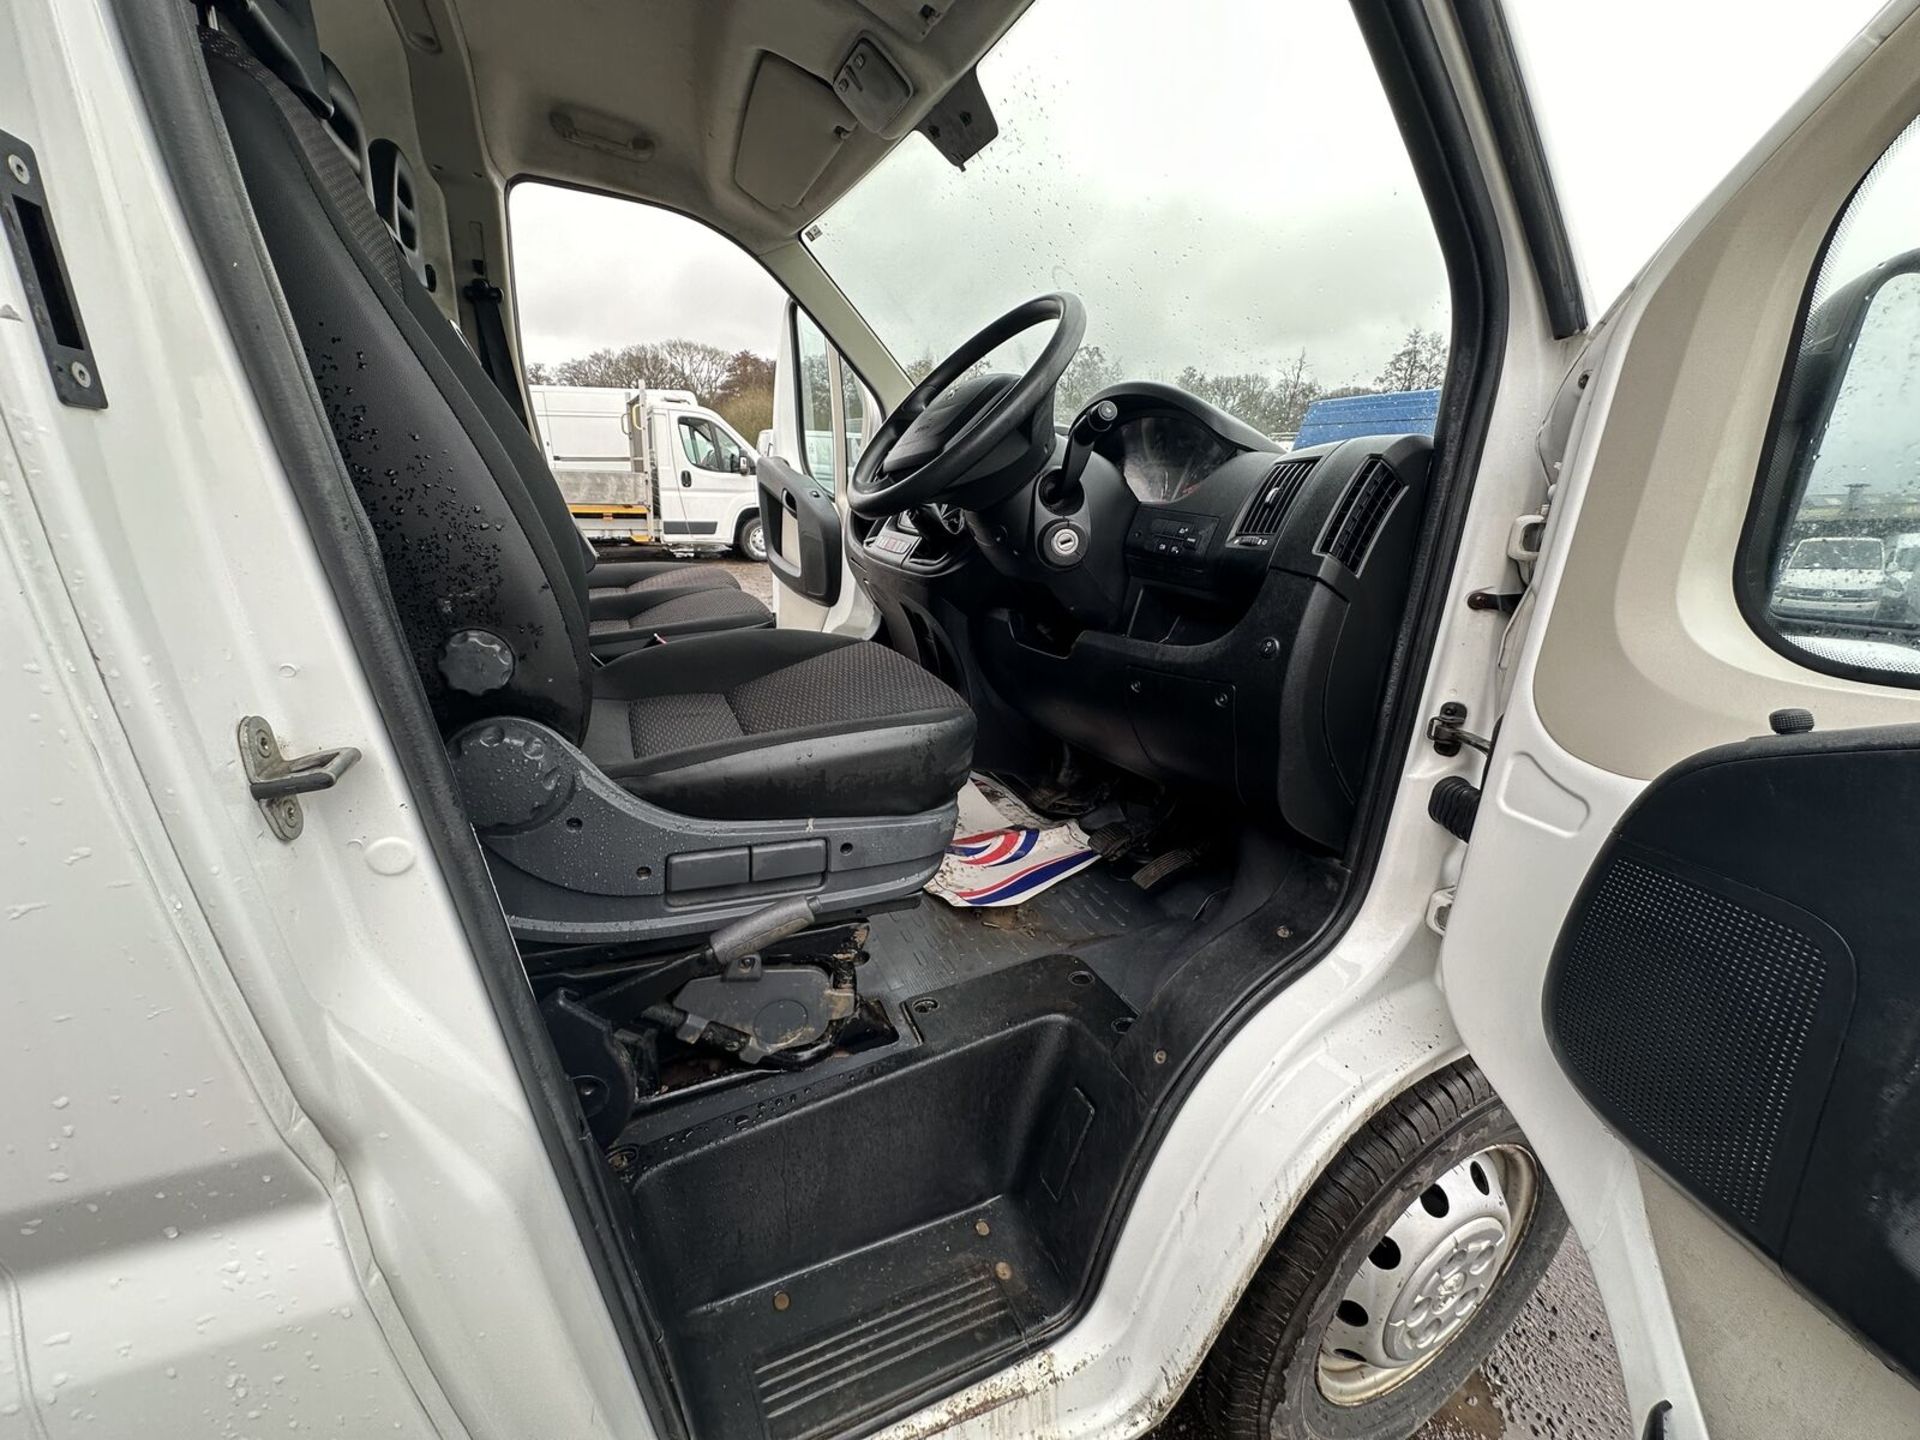 WHITE WORKHORSE: 2019 PANEL VAN, READY FOR DUTY - Image 7 of 18